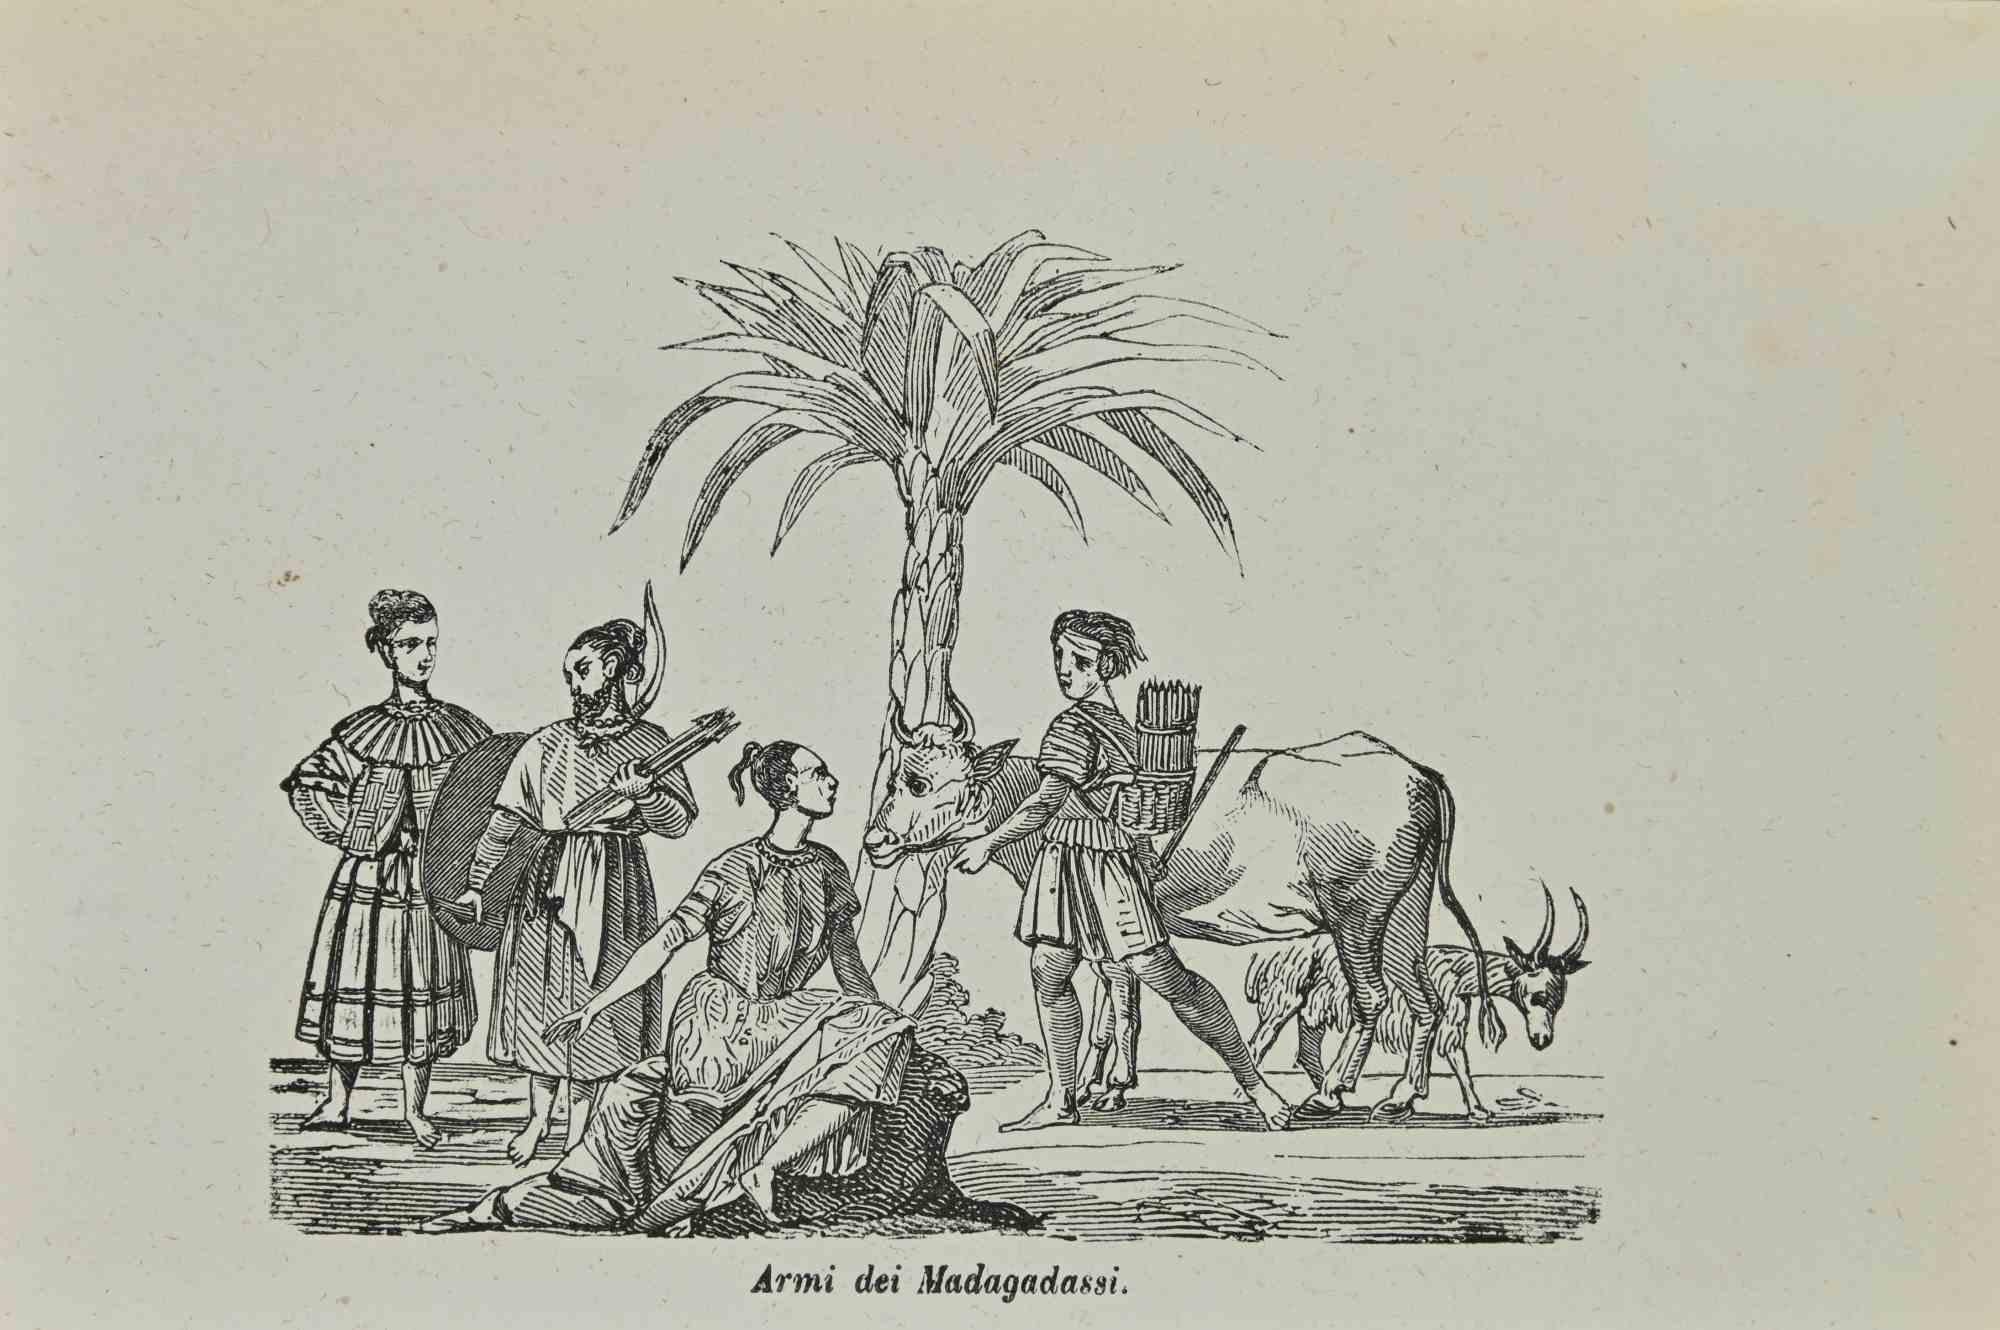 Unknown Figurative Print - Weapons of Madagadassi - Lithograph - 1862